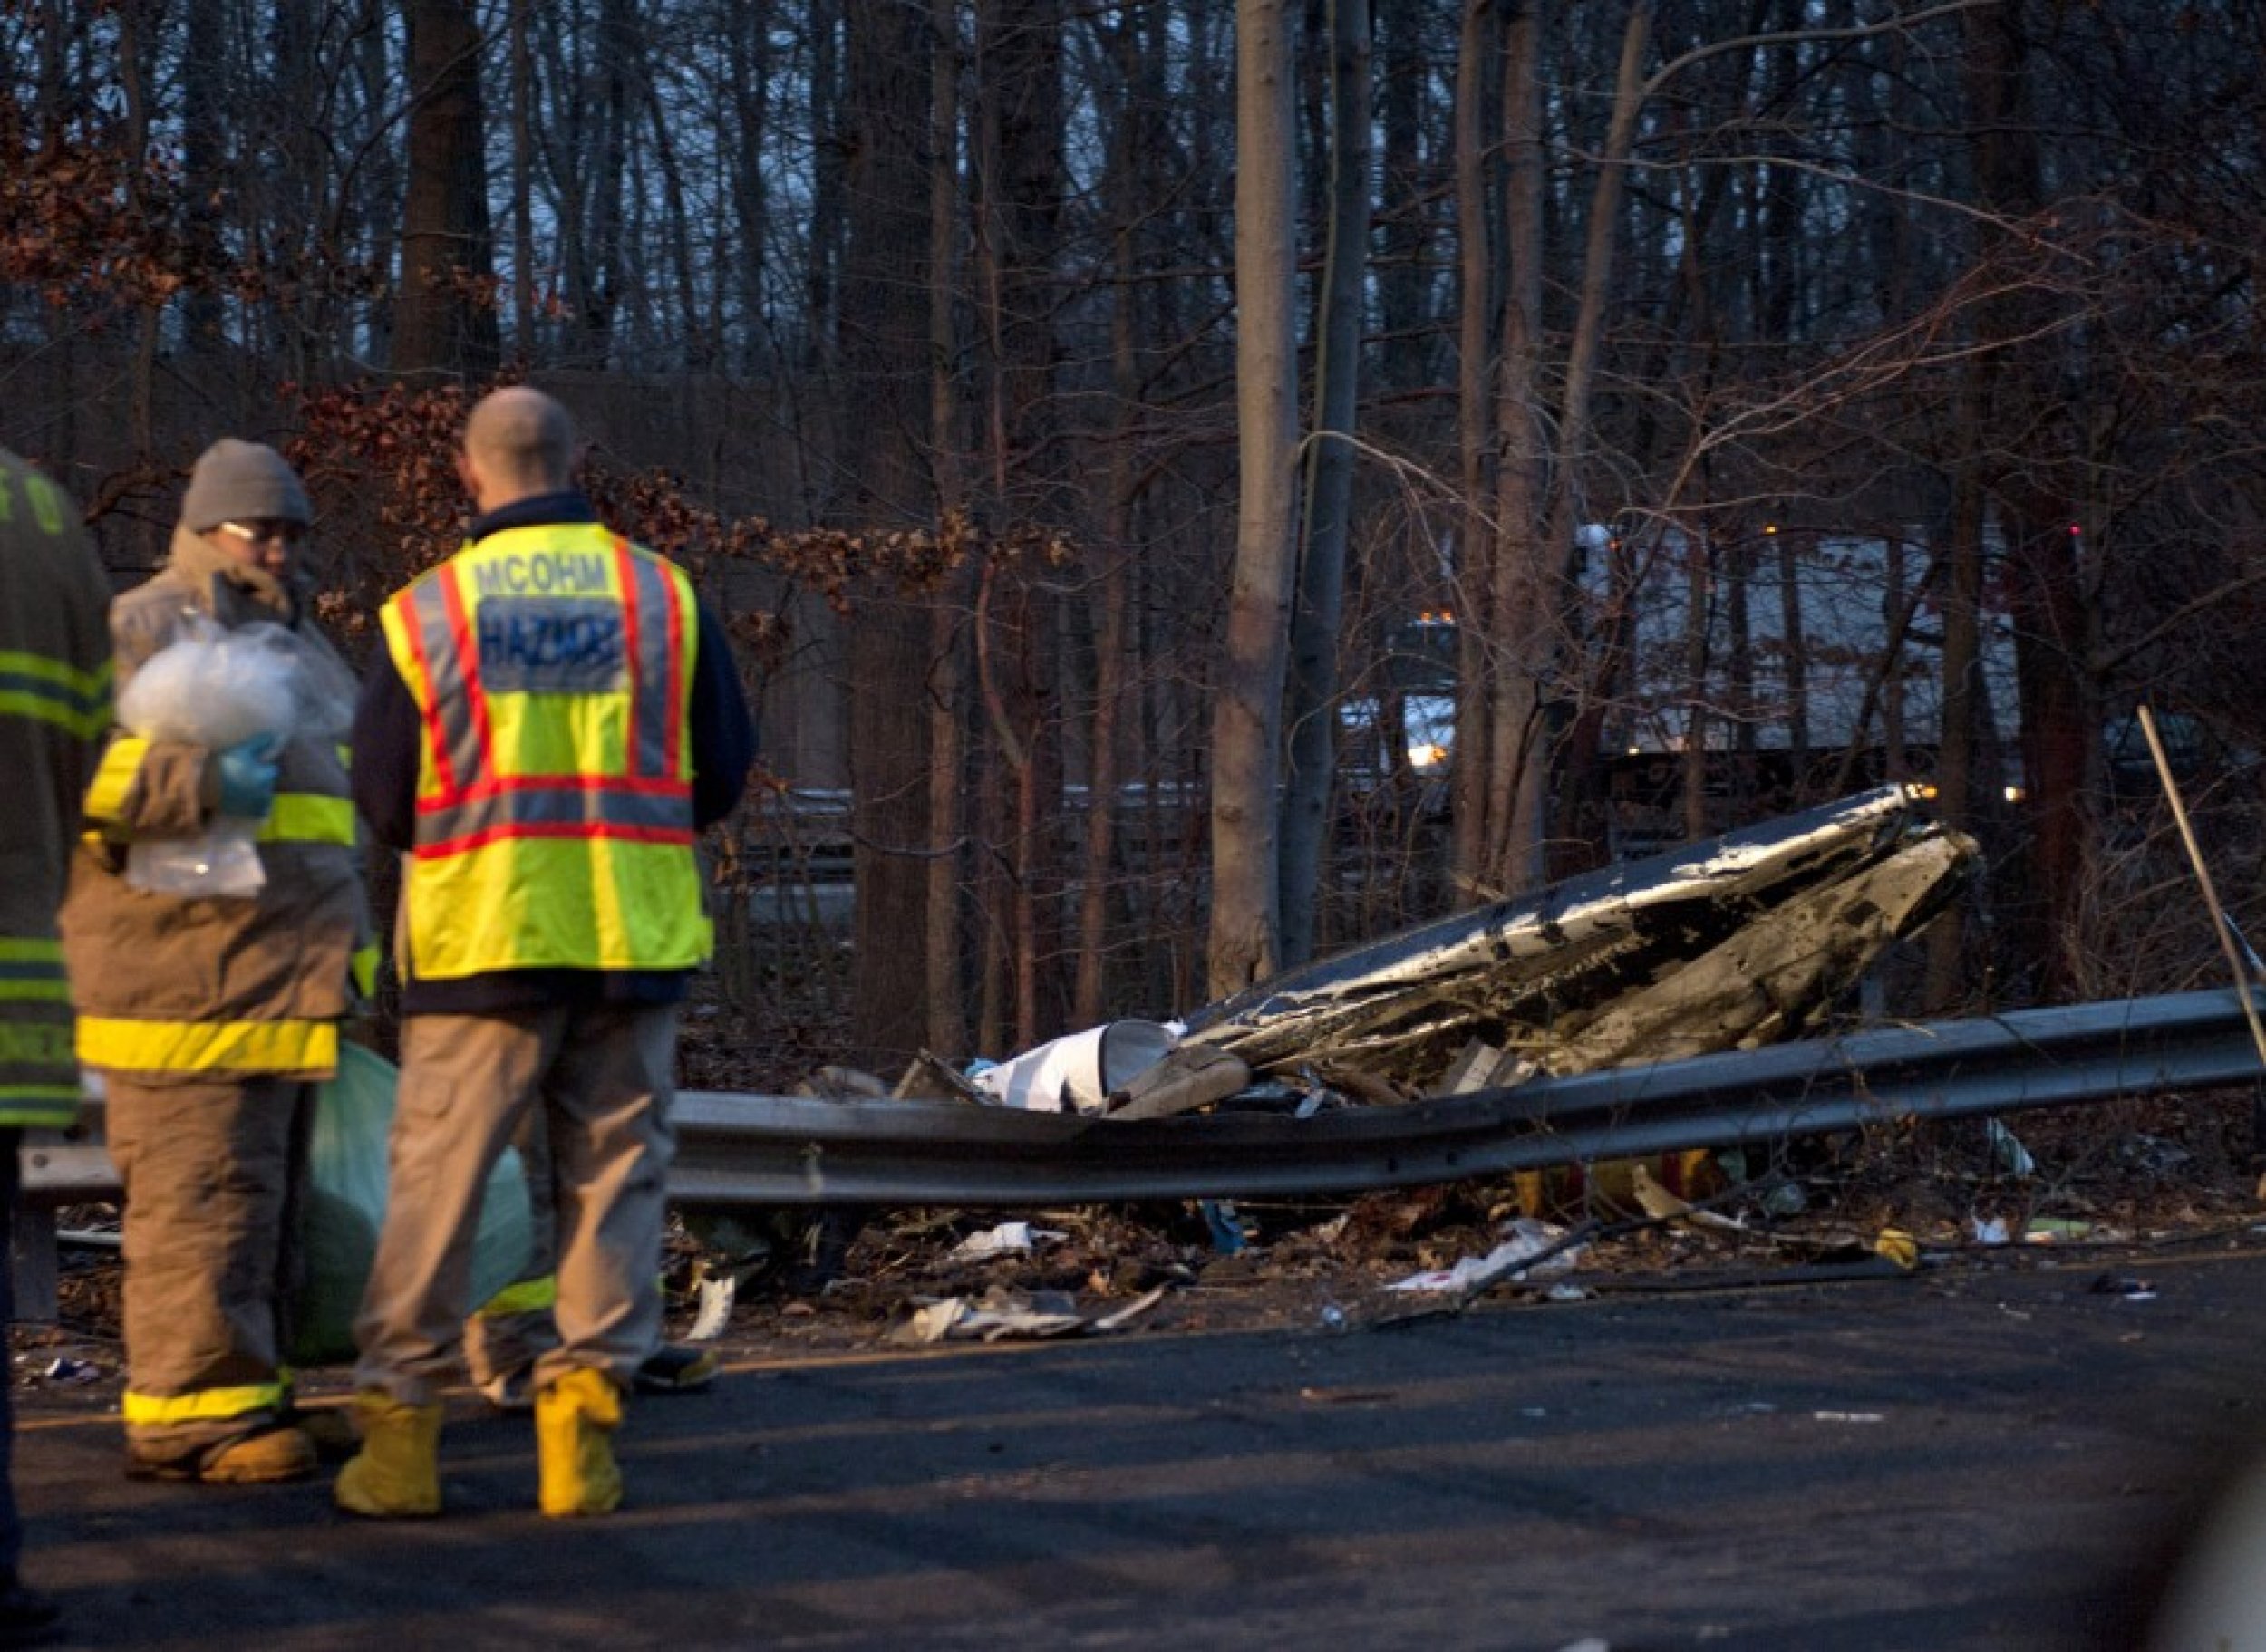 Deadly Crash On Route 287 In New Jersey Leaves Multiple Victims